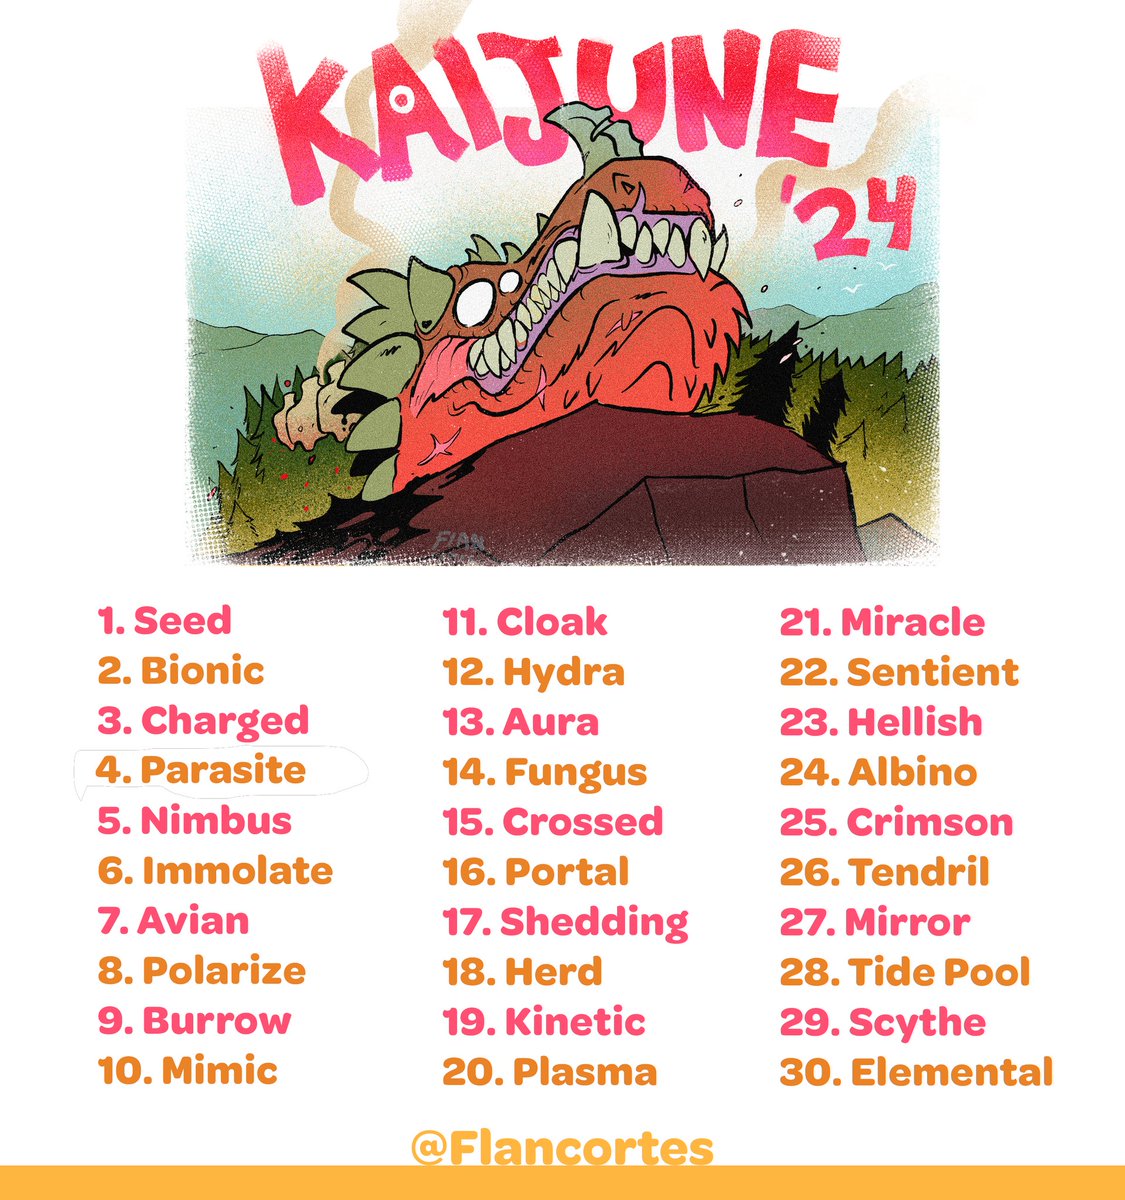 Since Kaijune is next month I wanted to post my prompt list for anyone that wants an early start on sketching and brainstorming :) 🫡